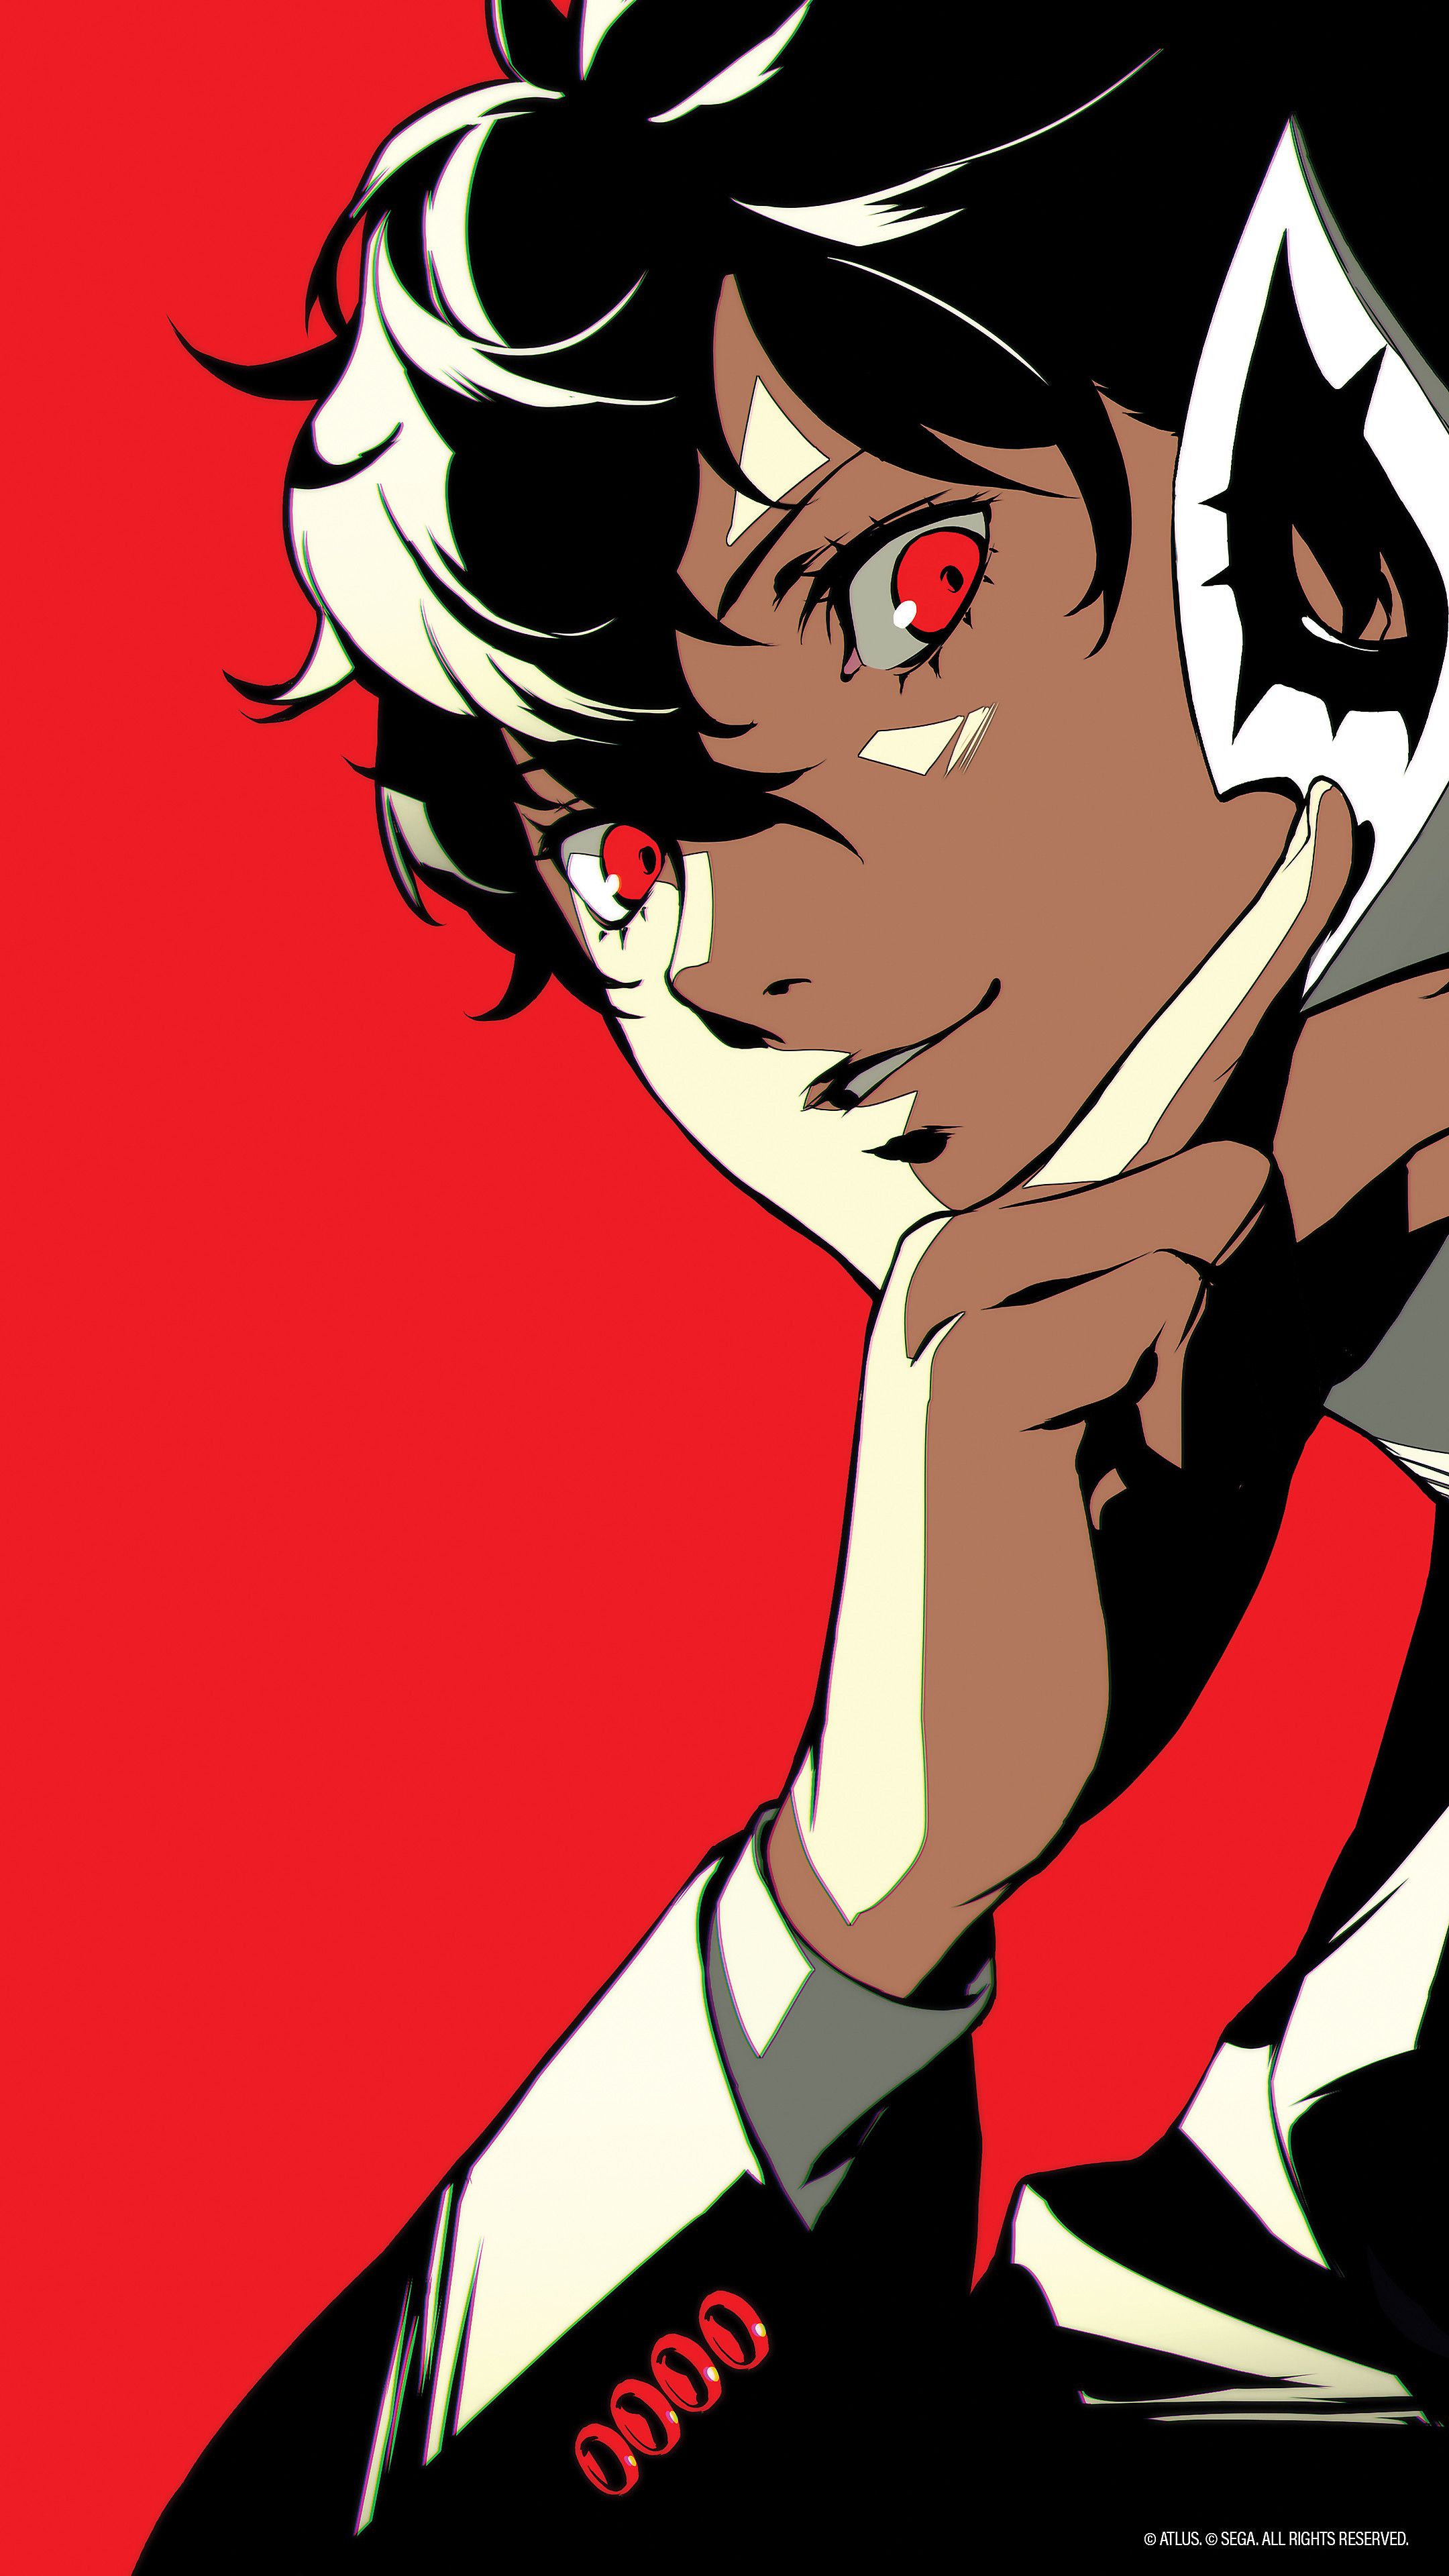 Persona 5 Joker Android Wallpapers - Wallpaper Cave